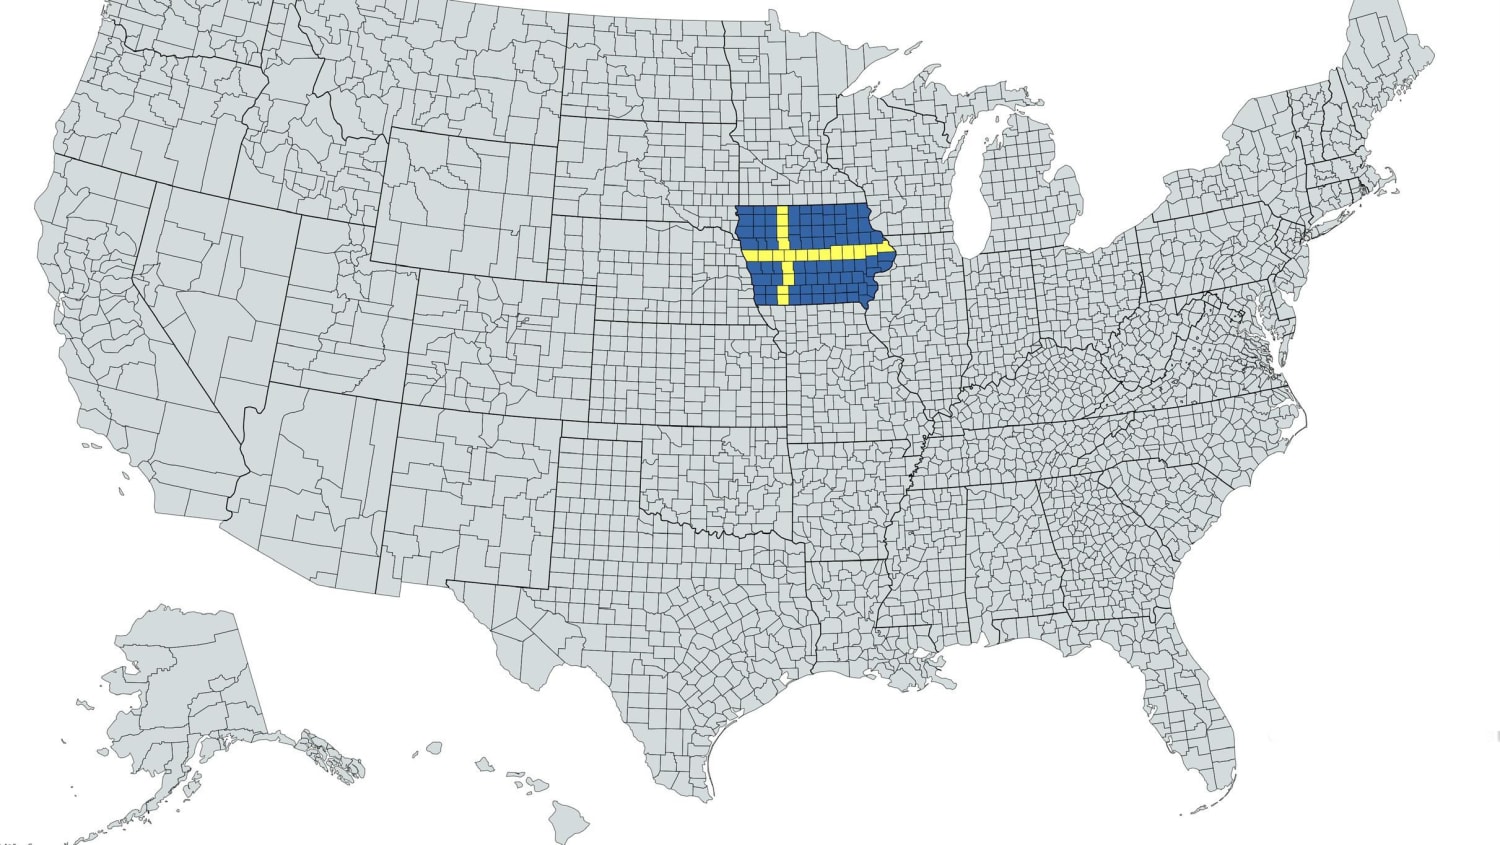 The United States but Iowa is a Swedish flag